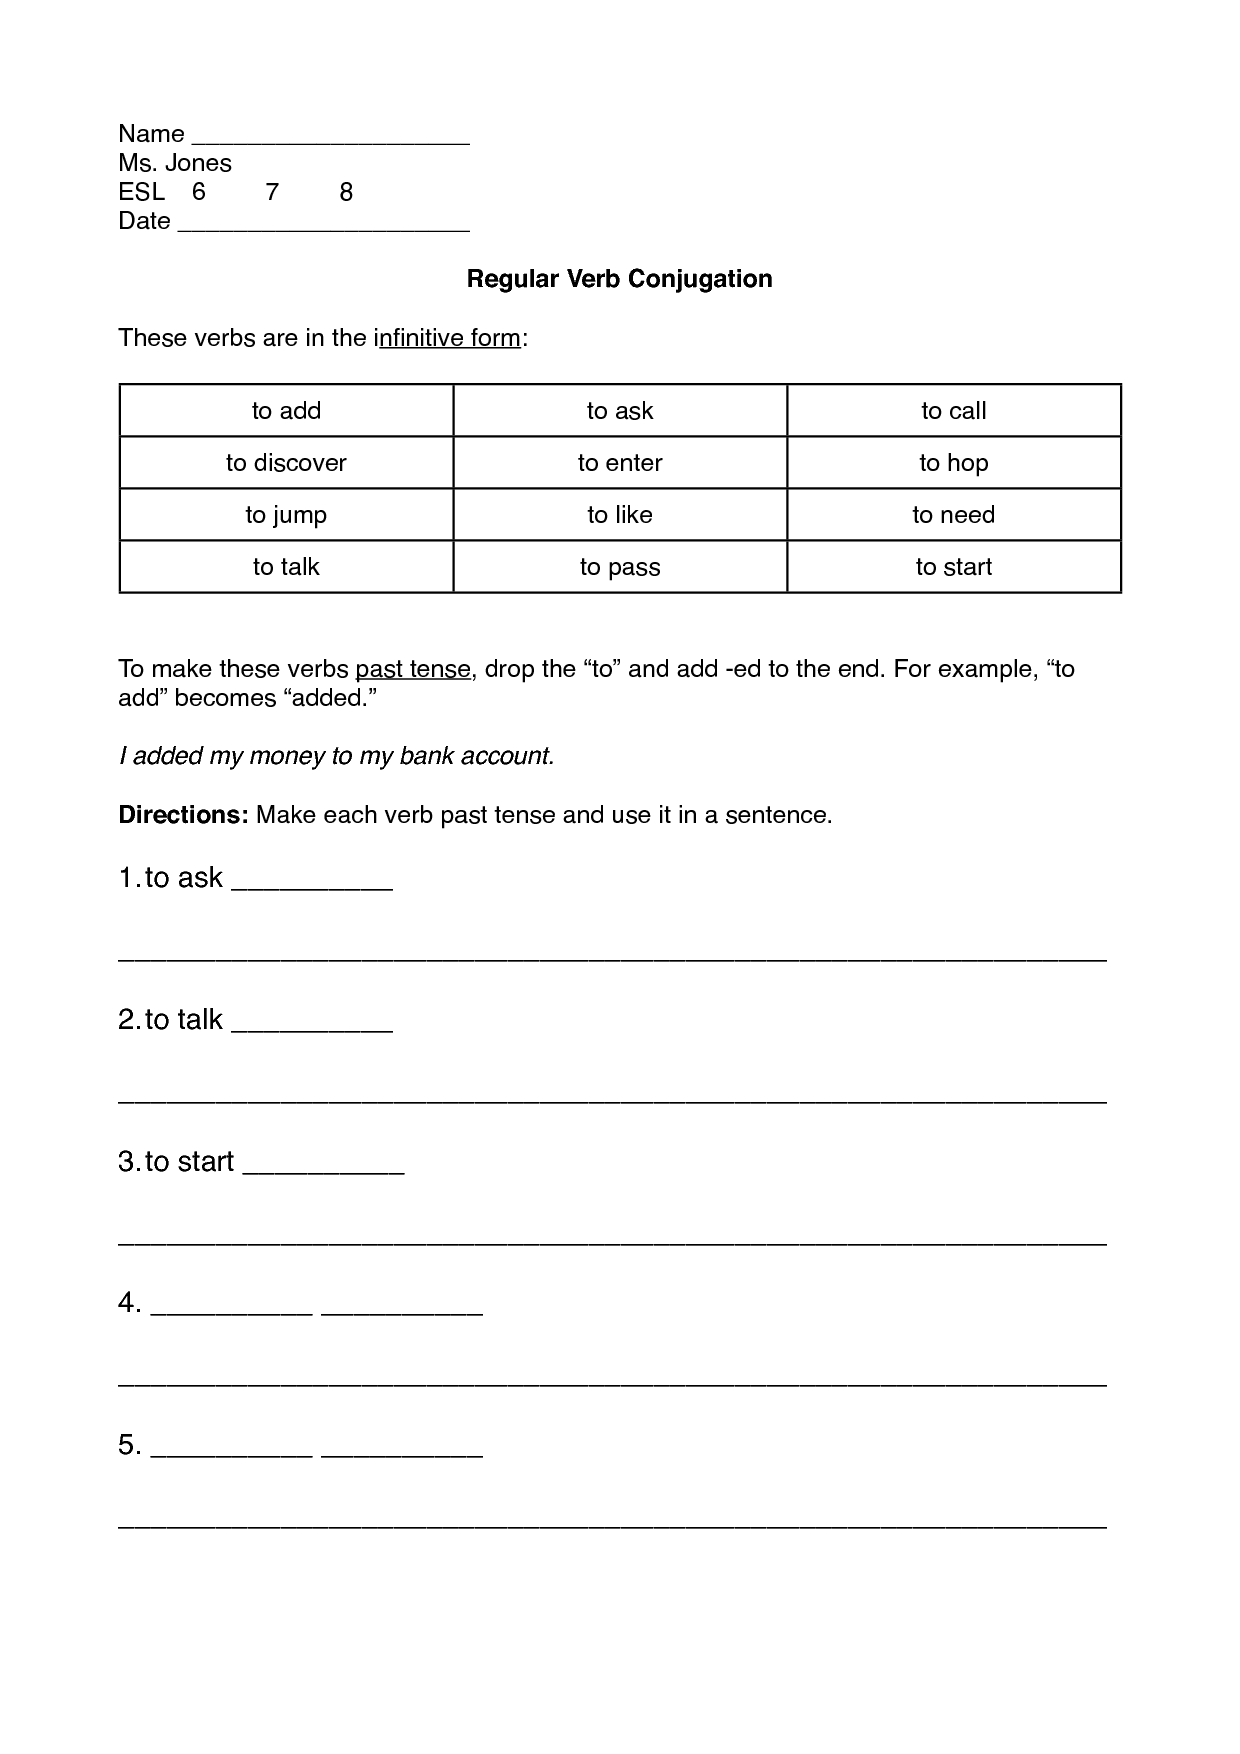 13-best-images-of-past-tense-ed-worksheet-past-tense-verbs-ed-worksheet-past-tense-verb